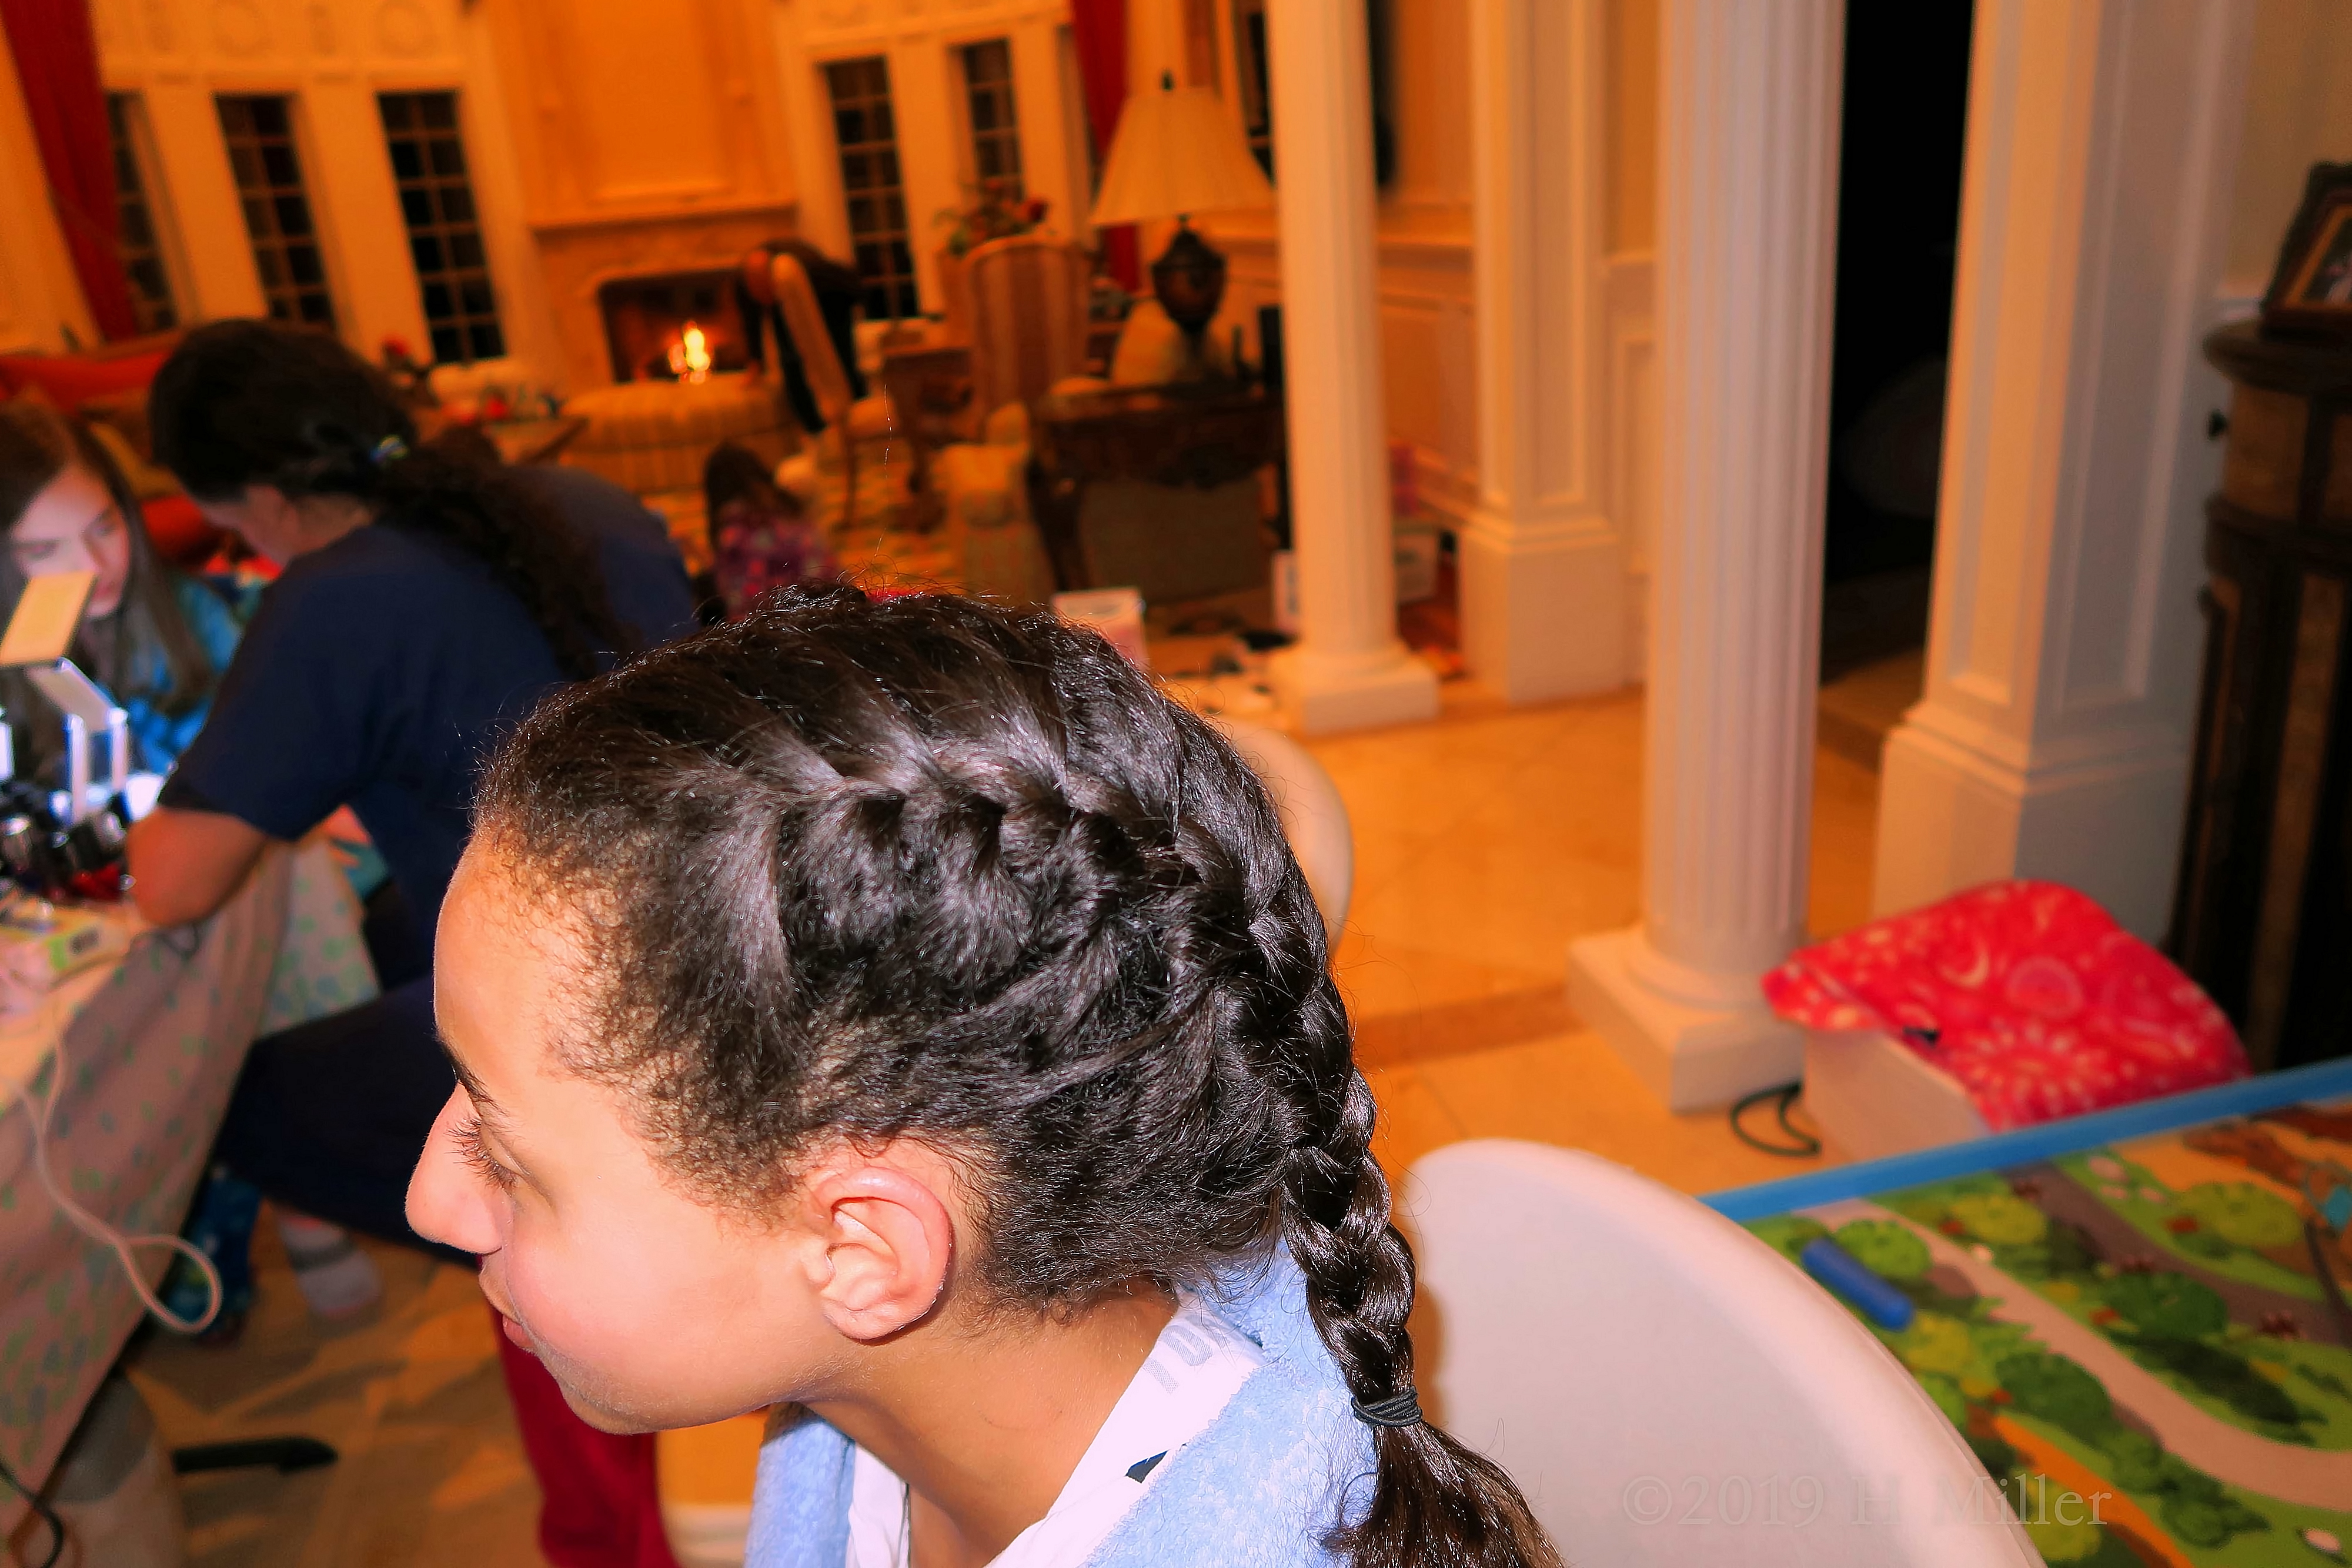 Elegant Dutch French Braids For This Spa Party Guest's Kids Hairstyle! 